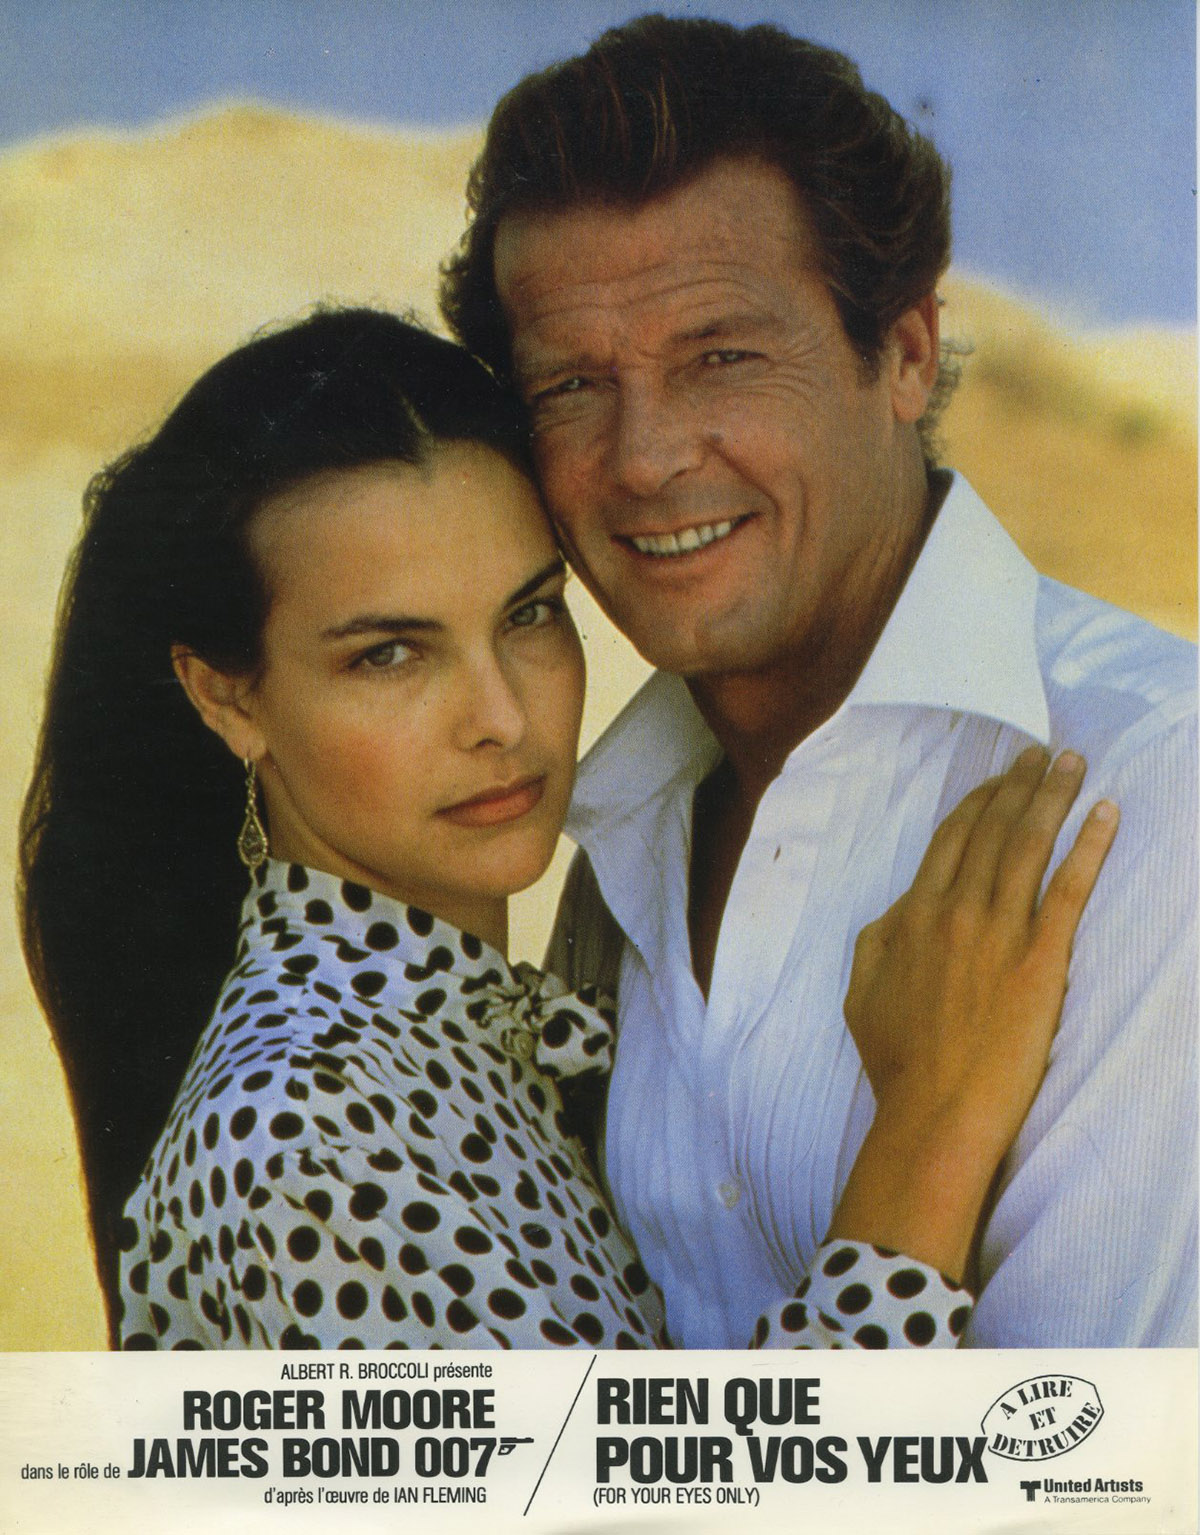 for-your-eyes-only-original-lobby-card-n01-9x12-in-1981-james-bond-roger-moore.jpg